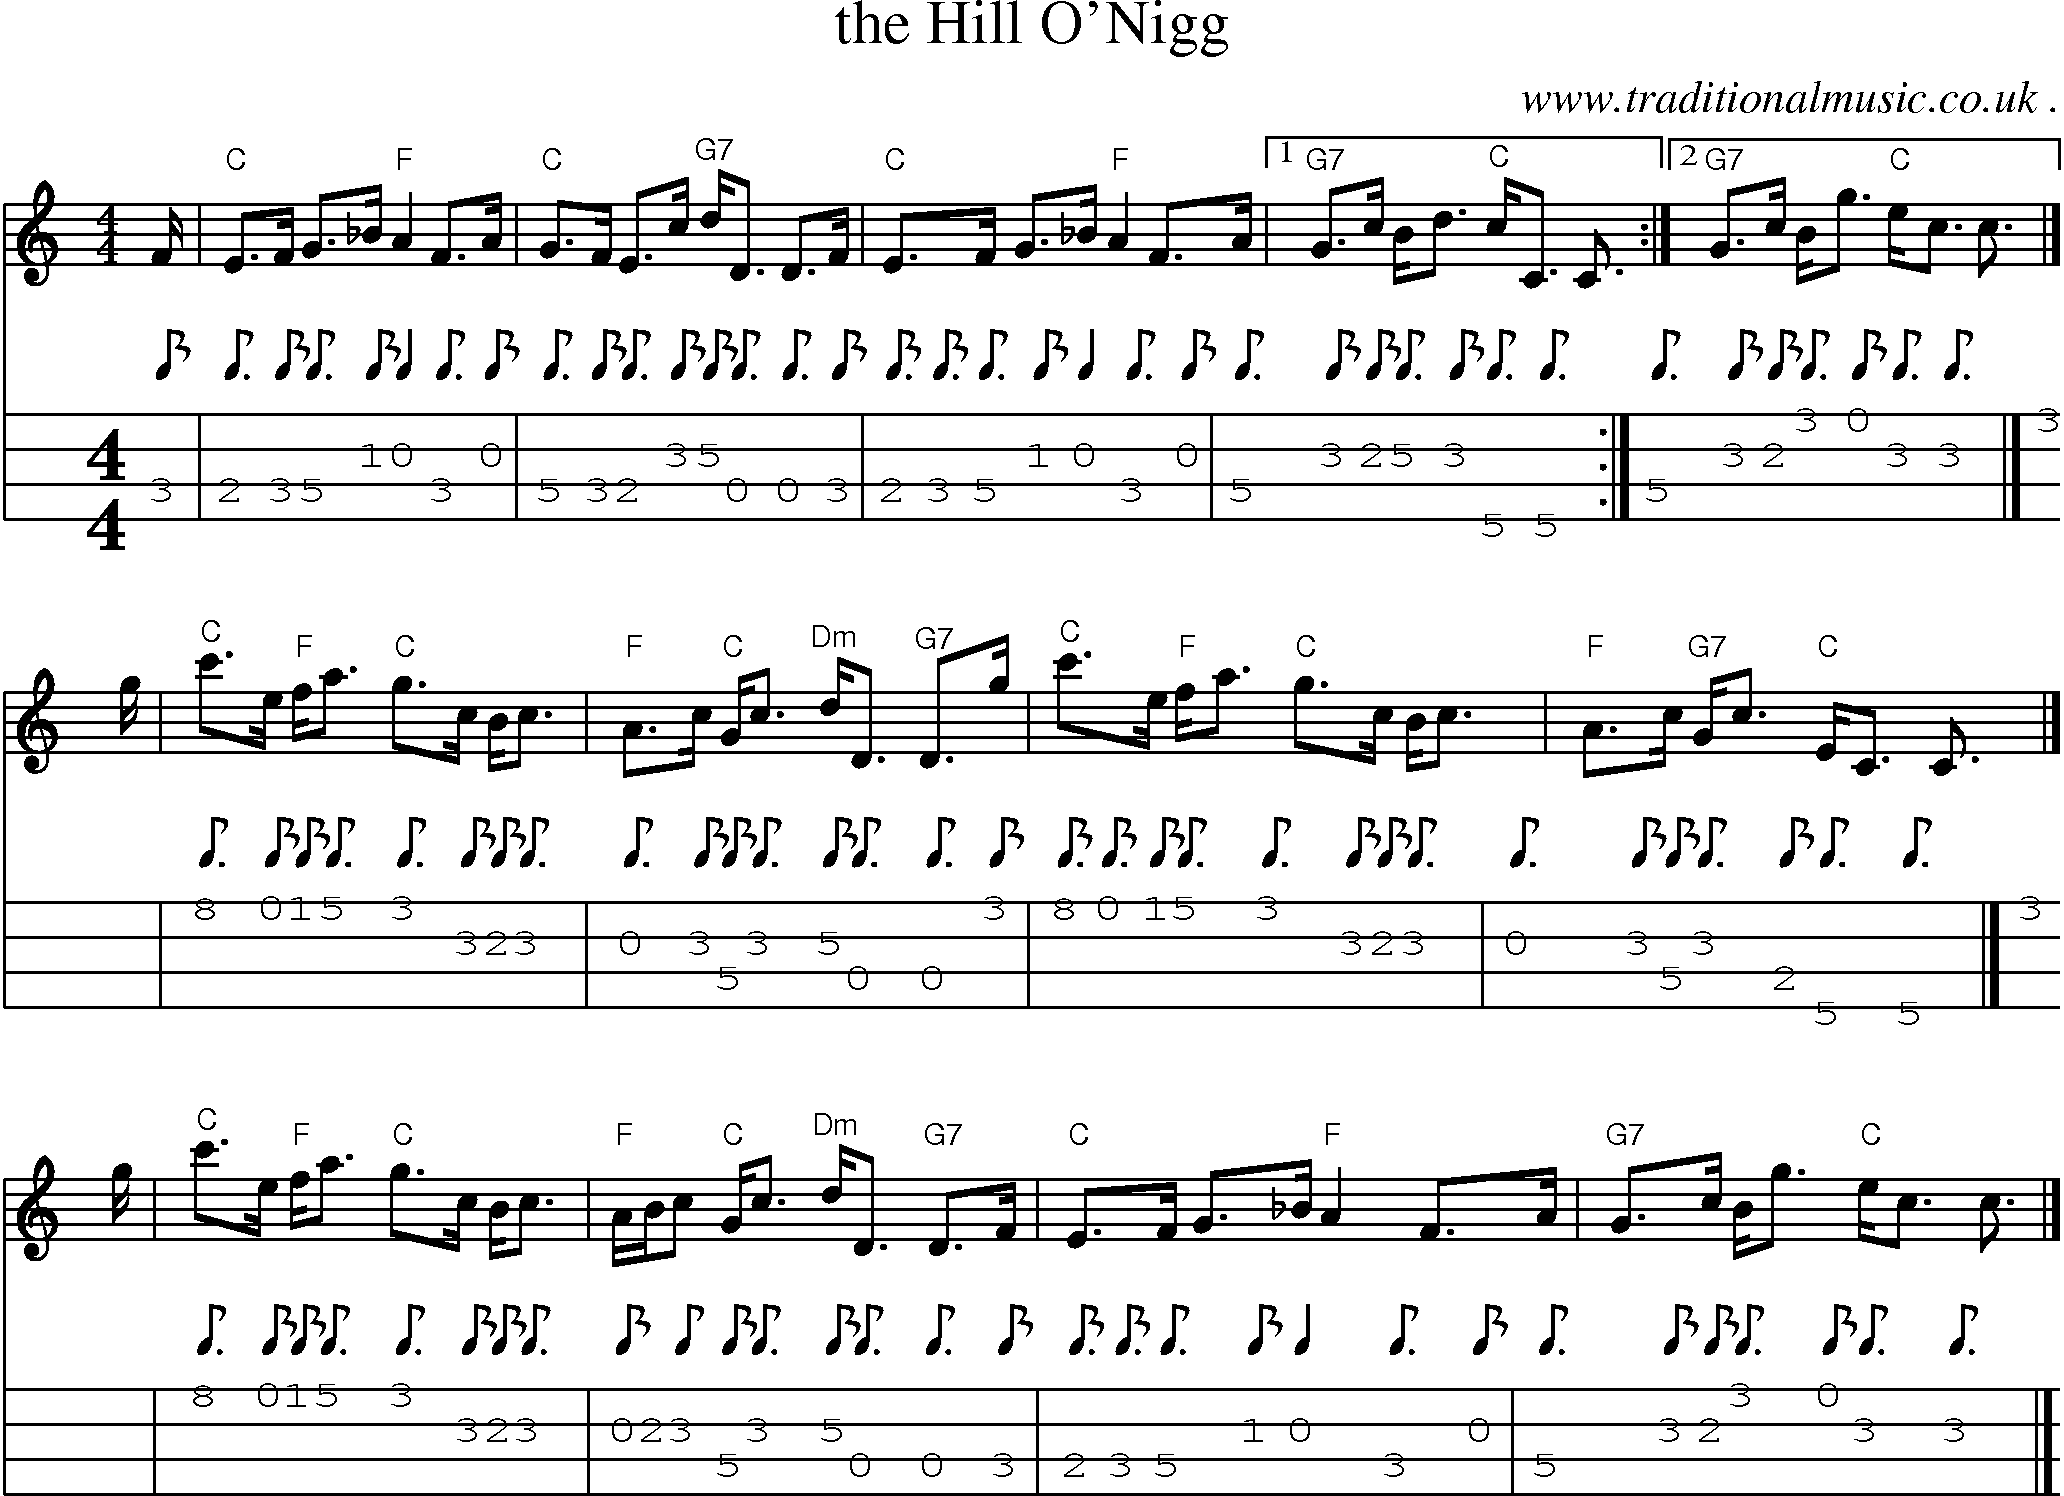 Sheet-music  score, Chords and Mandolin Tabs for The Hill Onigg